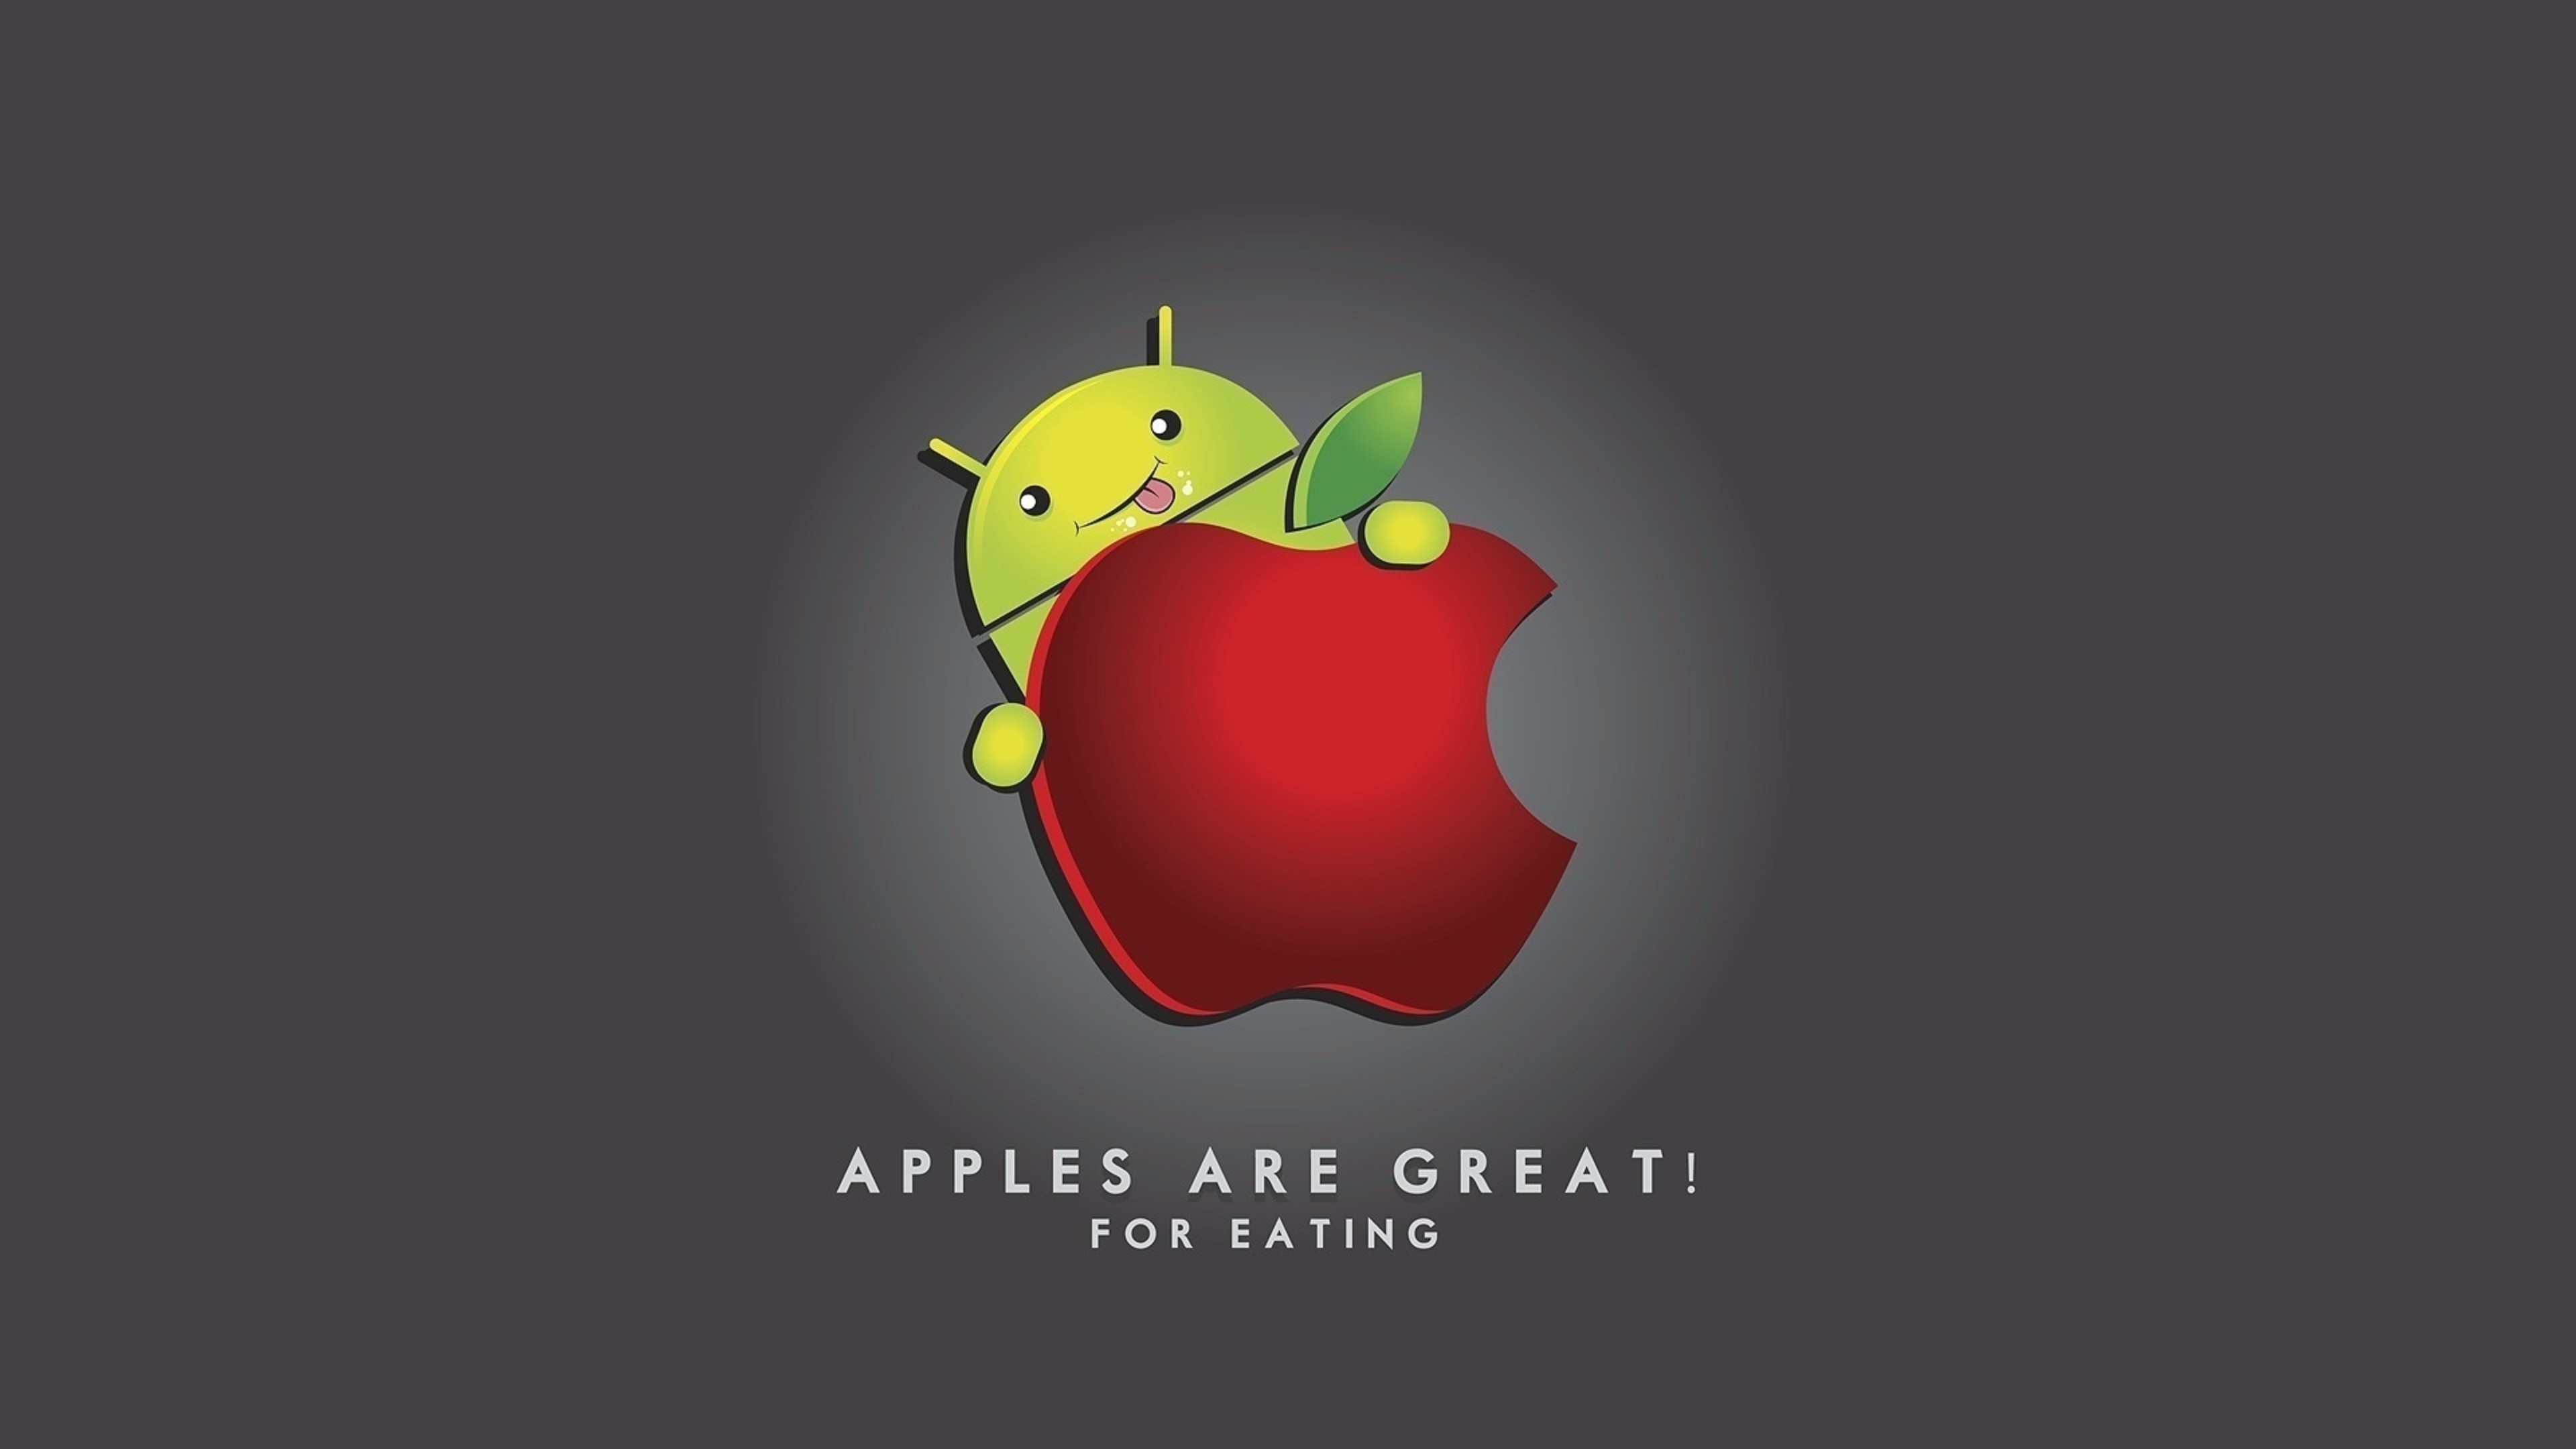 3840x2160 Apple vs Android Logo 4K Wallpapers